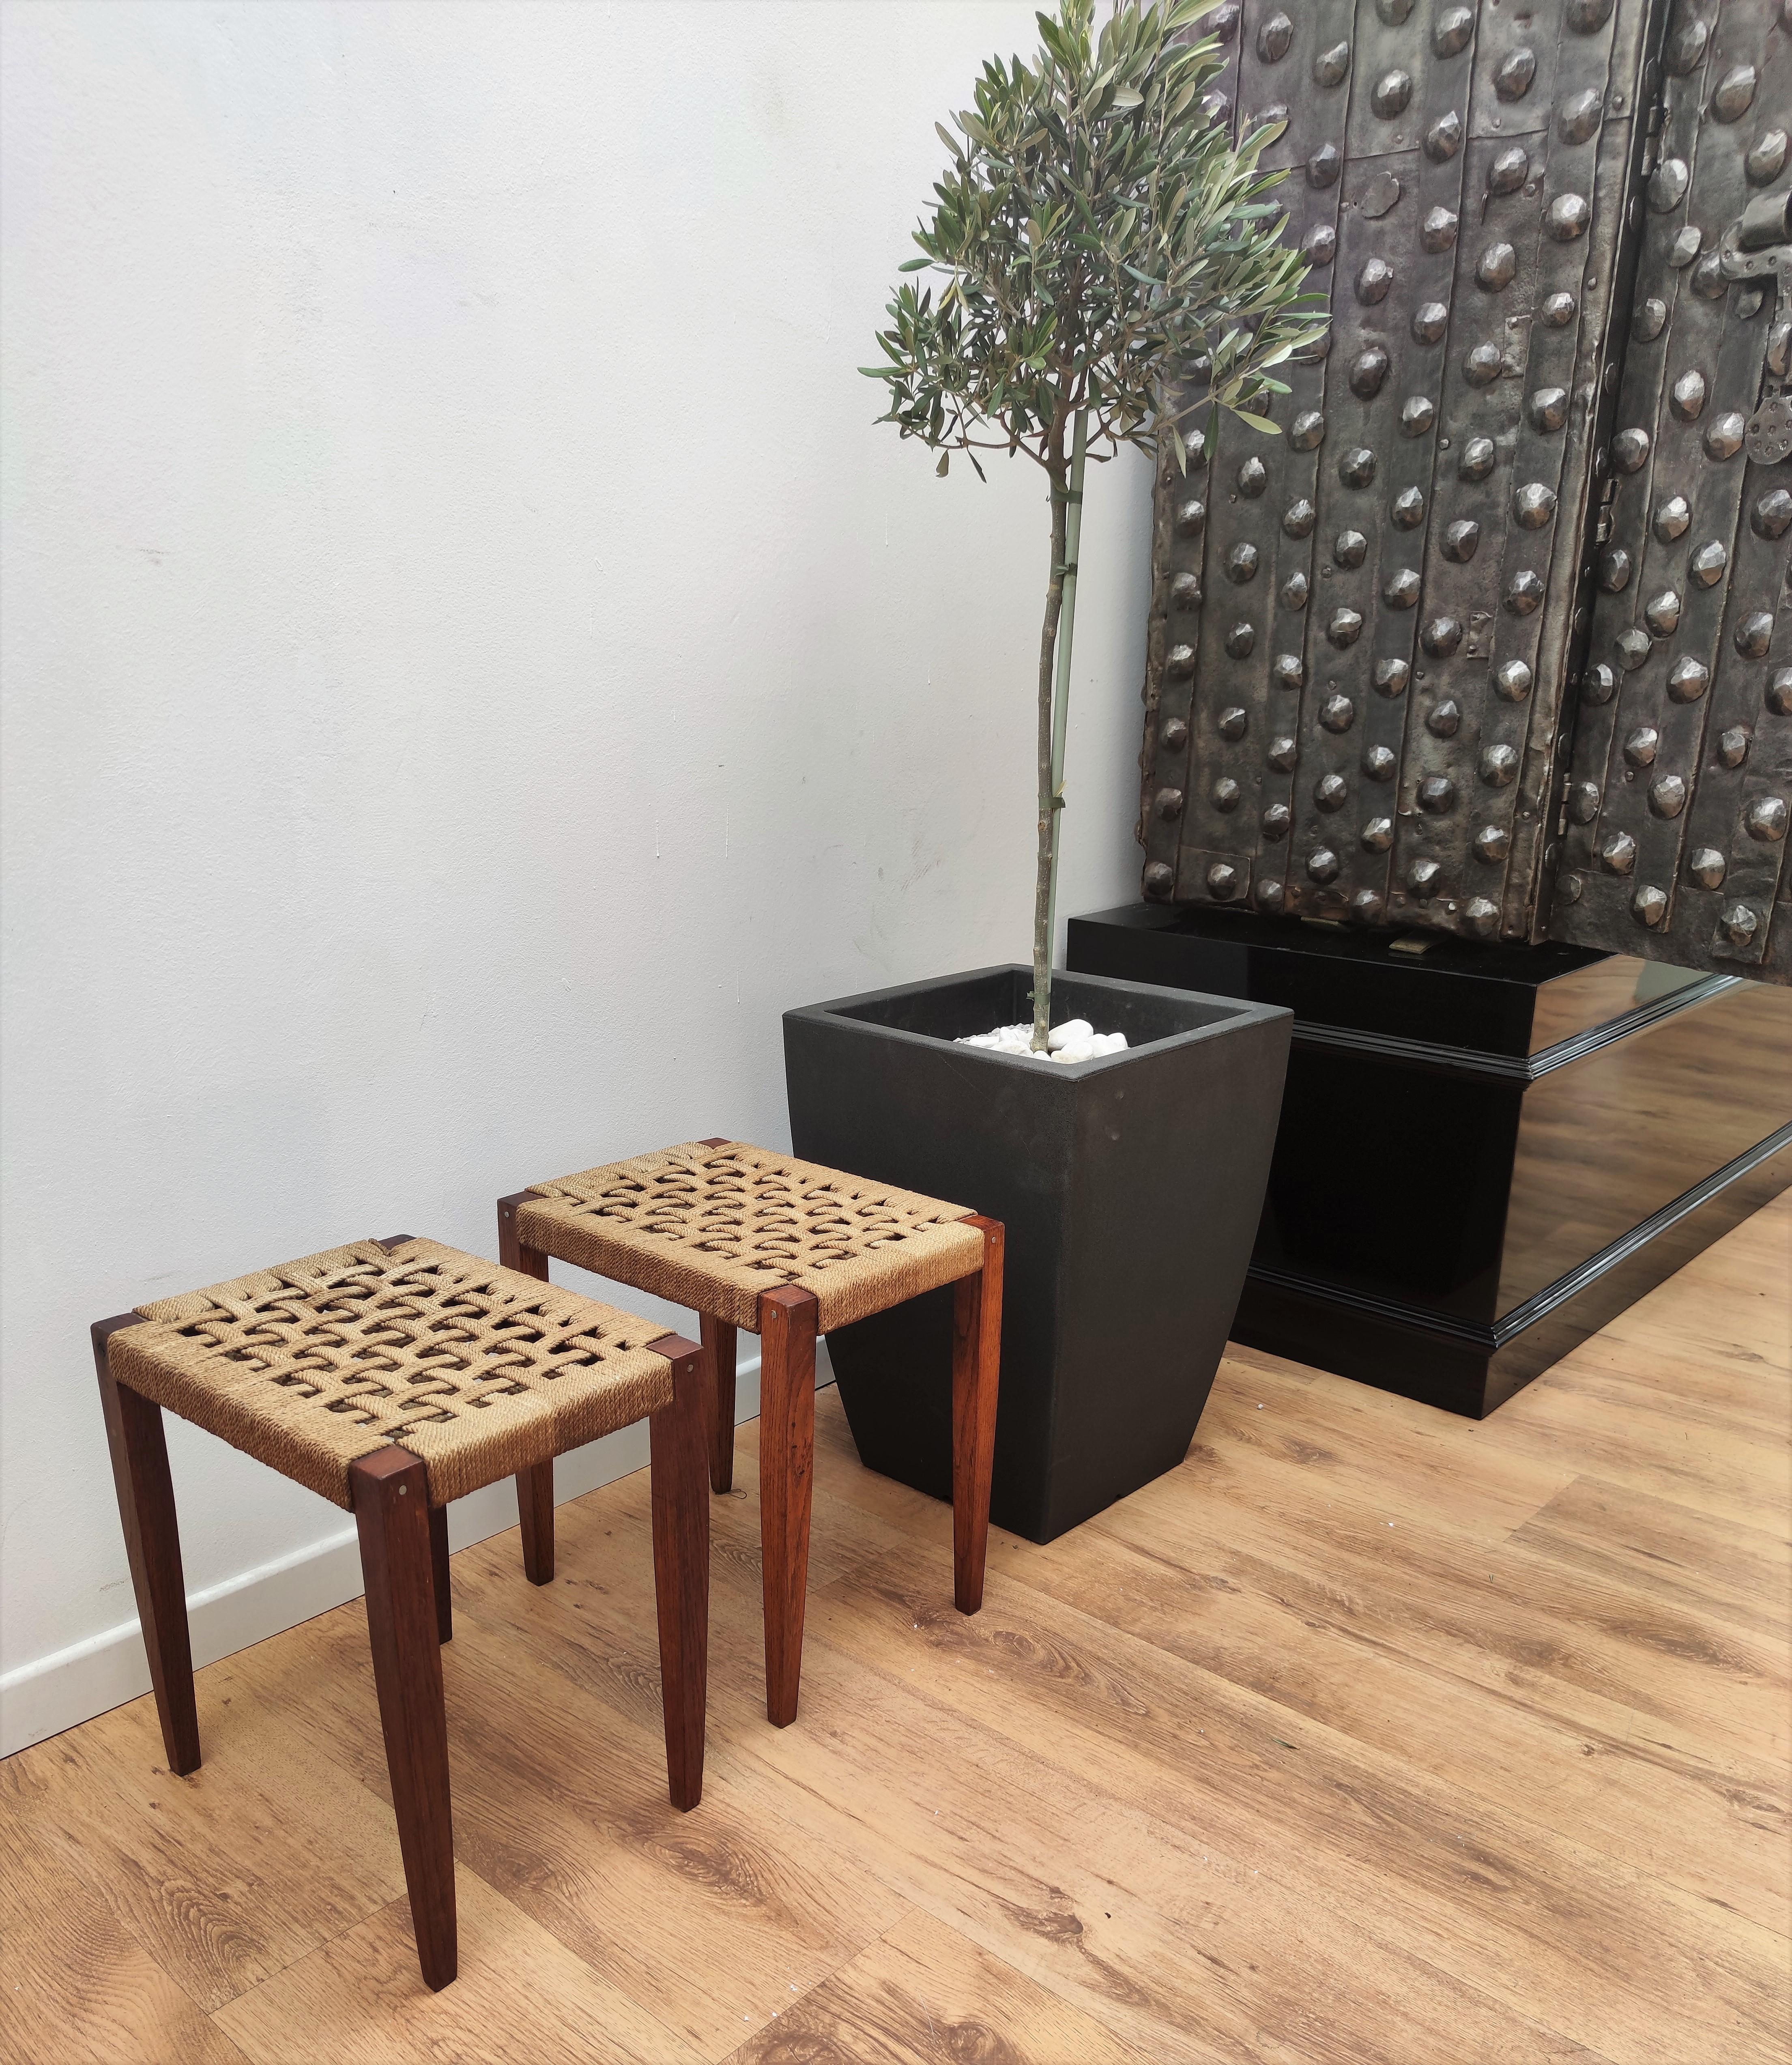 Stylish pair of 1960s Mid-Century Modern stools in wood and cord or woven rope, in the style of Audoux Minet. The traditional and simple design and shape of the wooden structure, typical of Mid-Century Modern style, perfectly complements with the